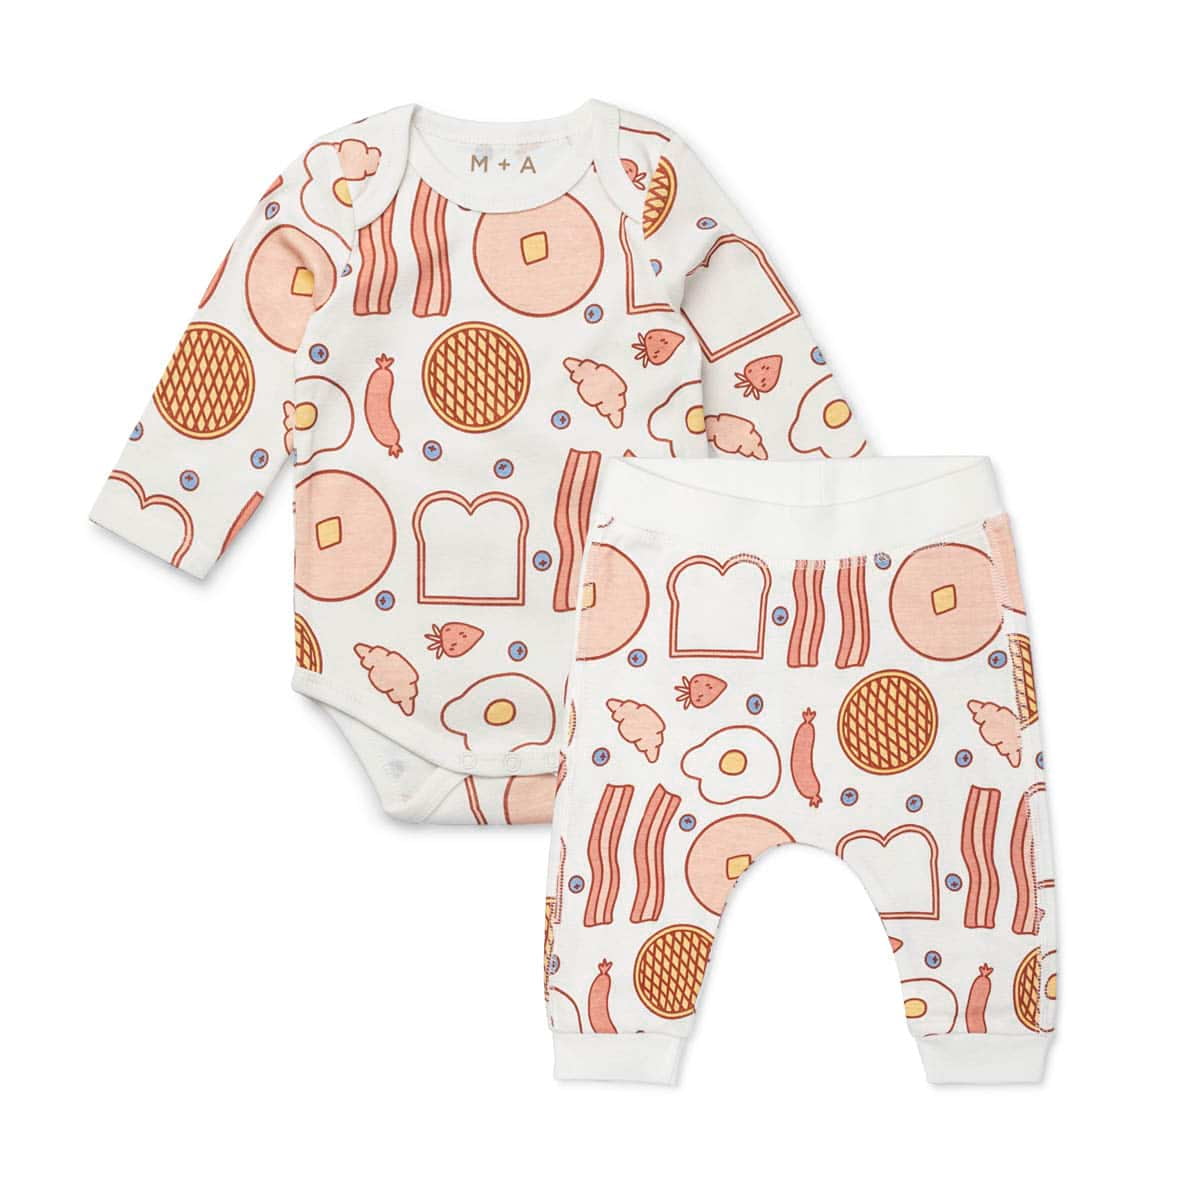 M+A by Monica + Andy Baby First Moves Set, Sizes Preemie-9 Months 